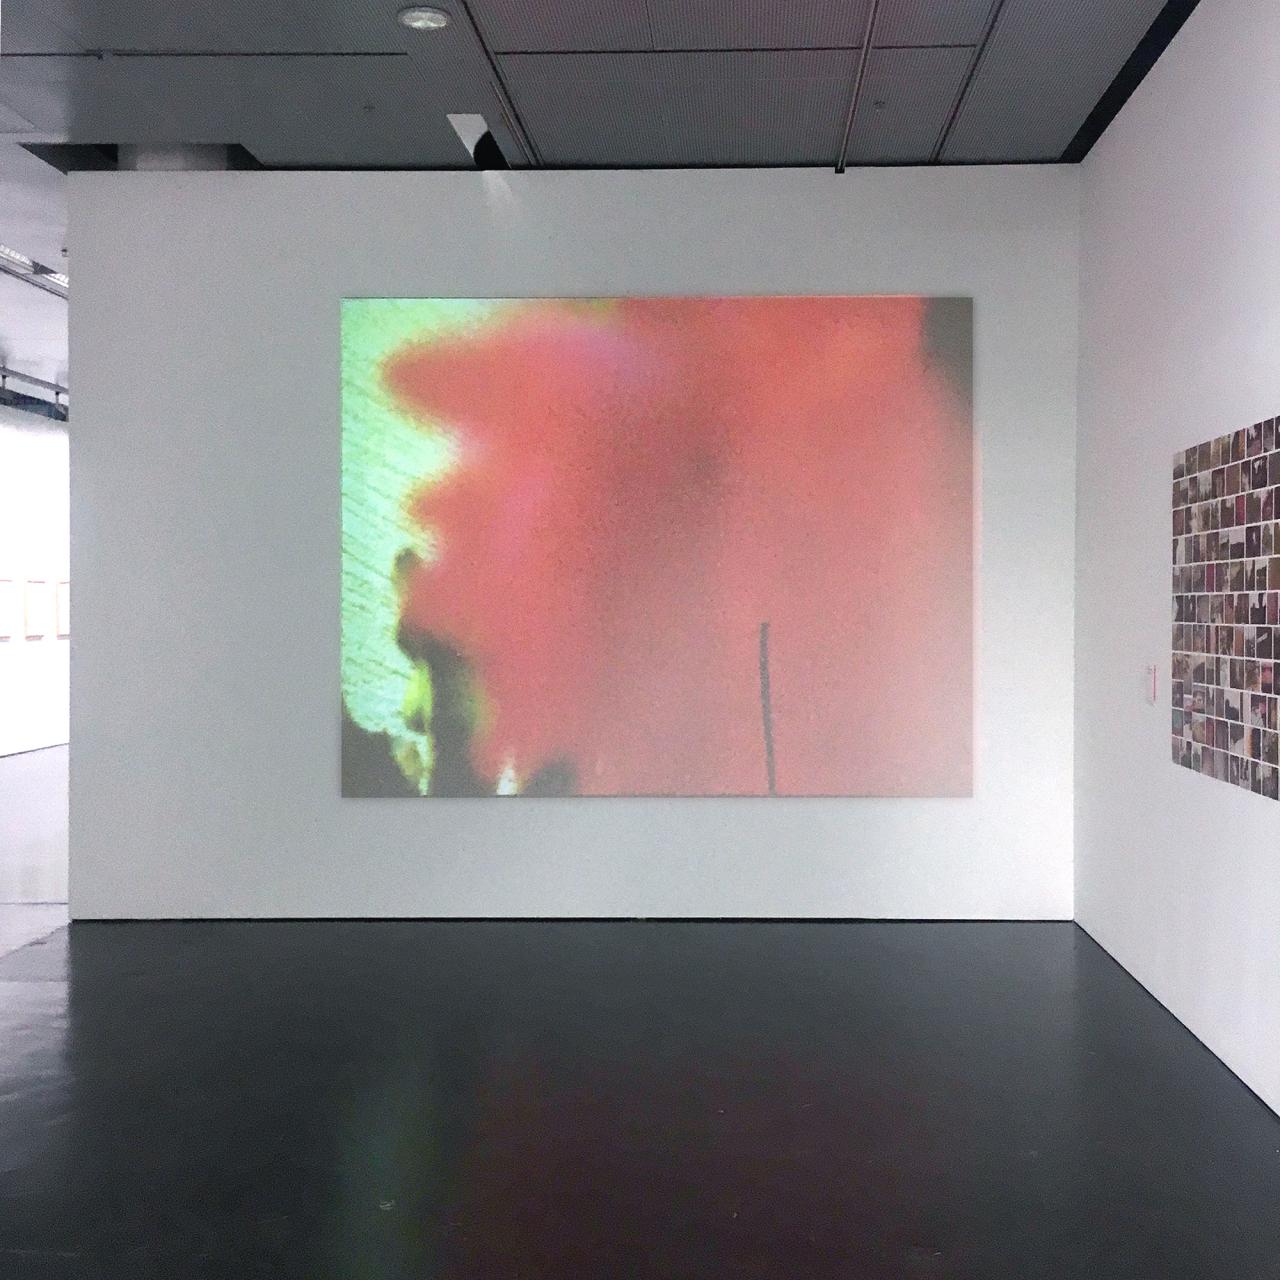 Projection on a wall shows abstract red image